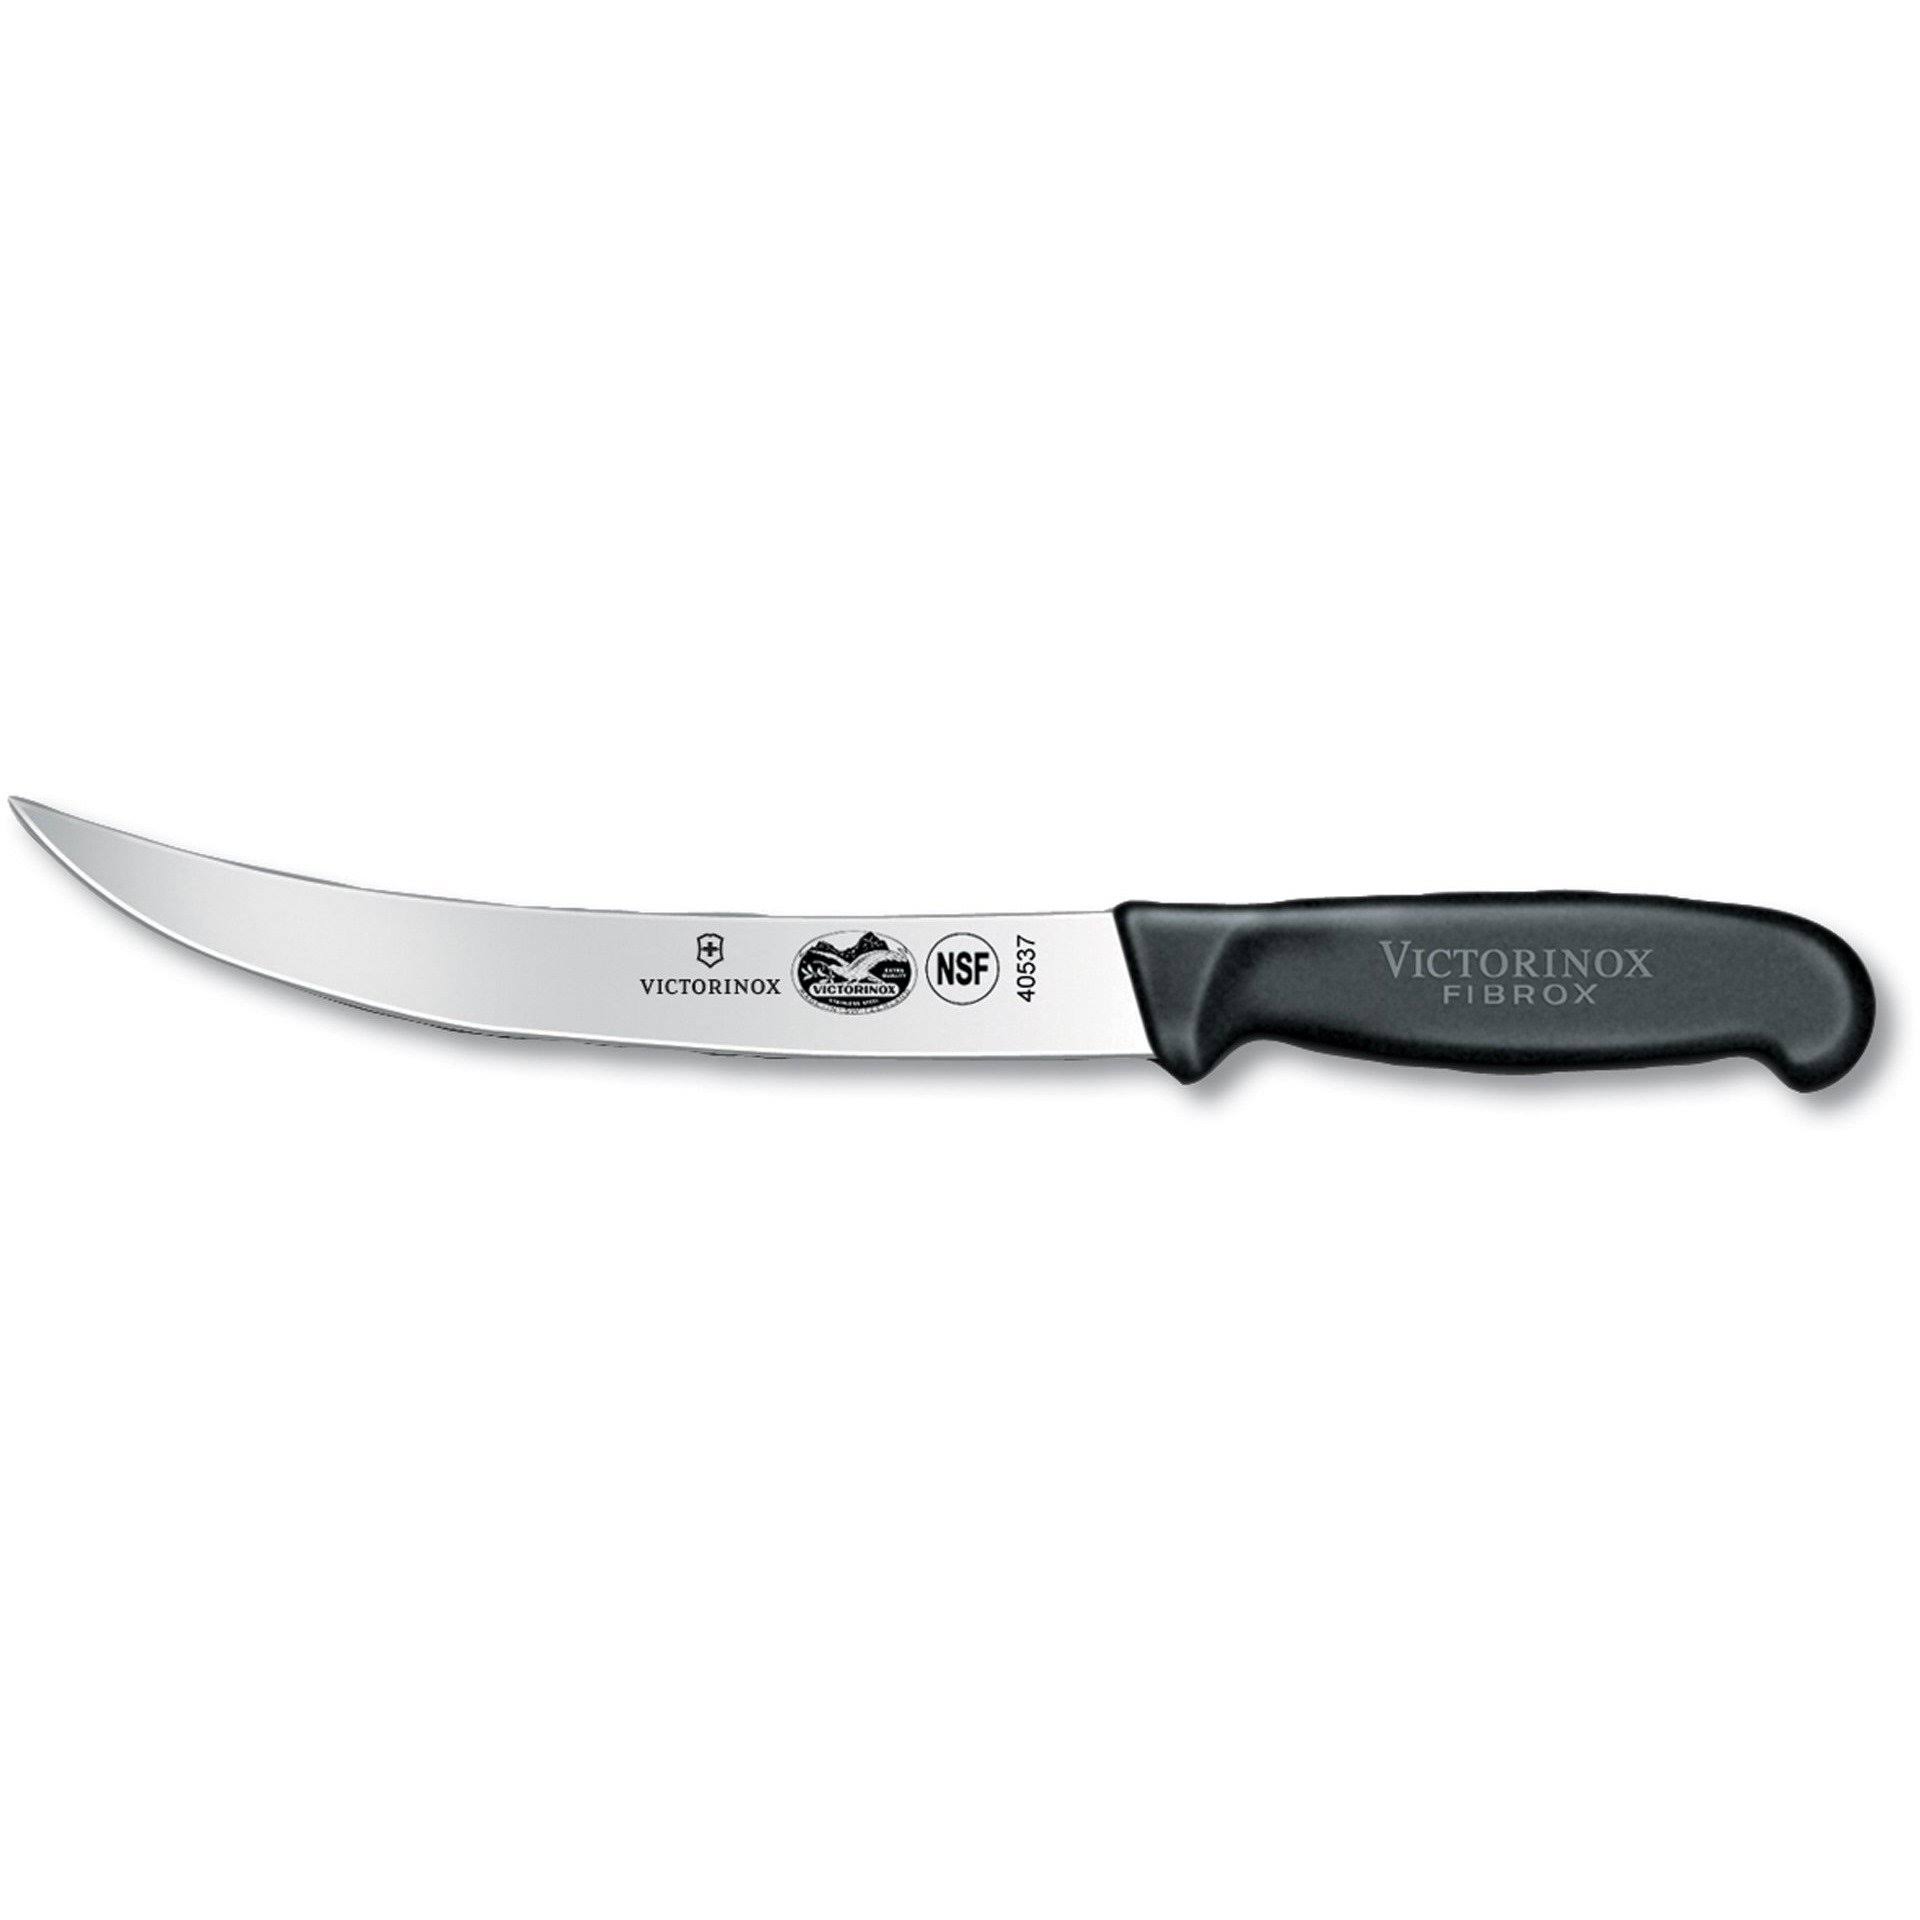 Victorinox Black Fibrox Handle Curved Butcher and Breaking Knife - 8"